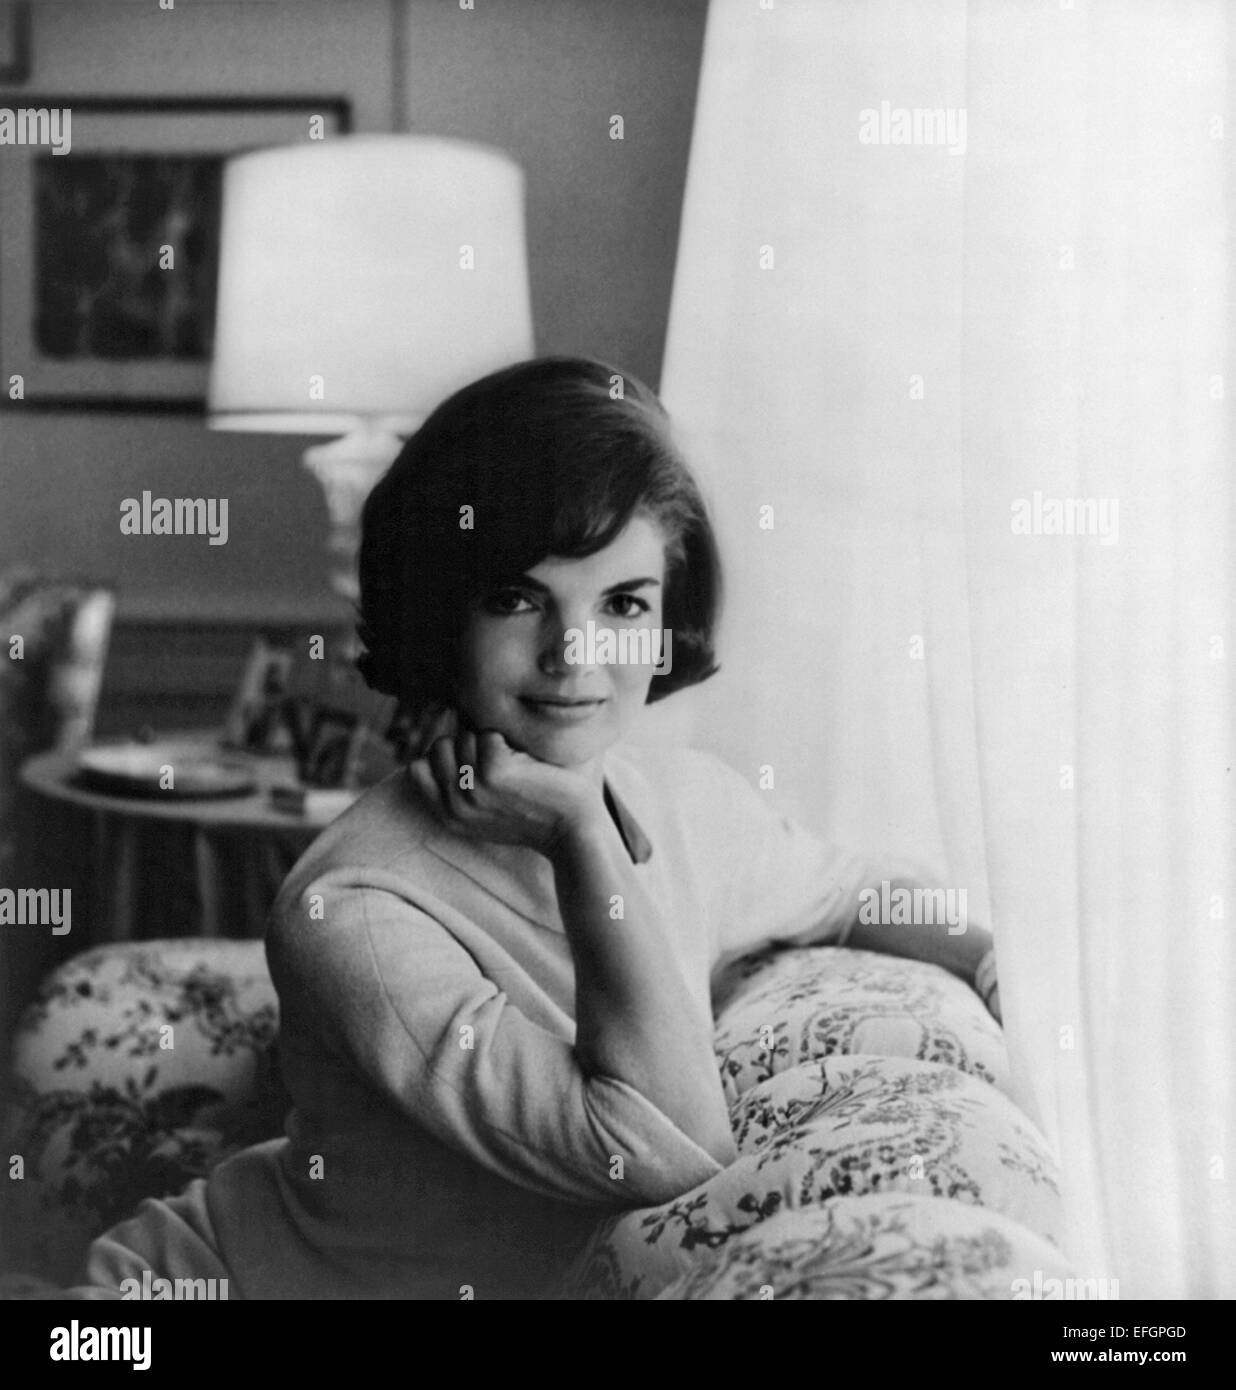 US First Lady Jacqueline Kennedy in her first official White House portrait 1961 in Washington, DC. Stock Photo